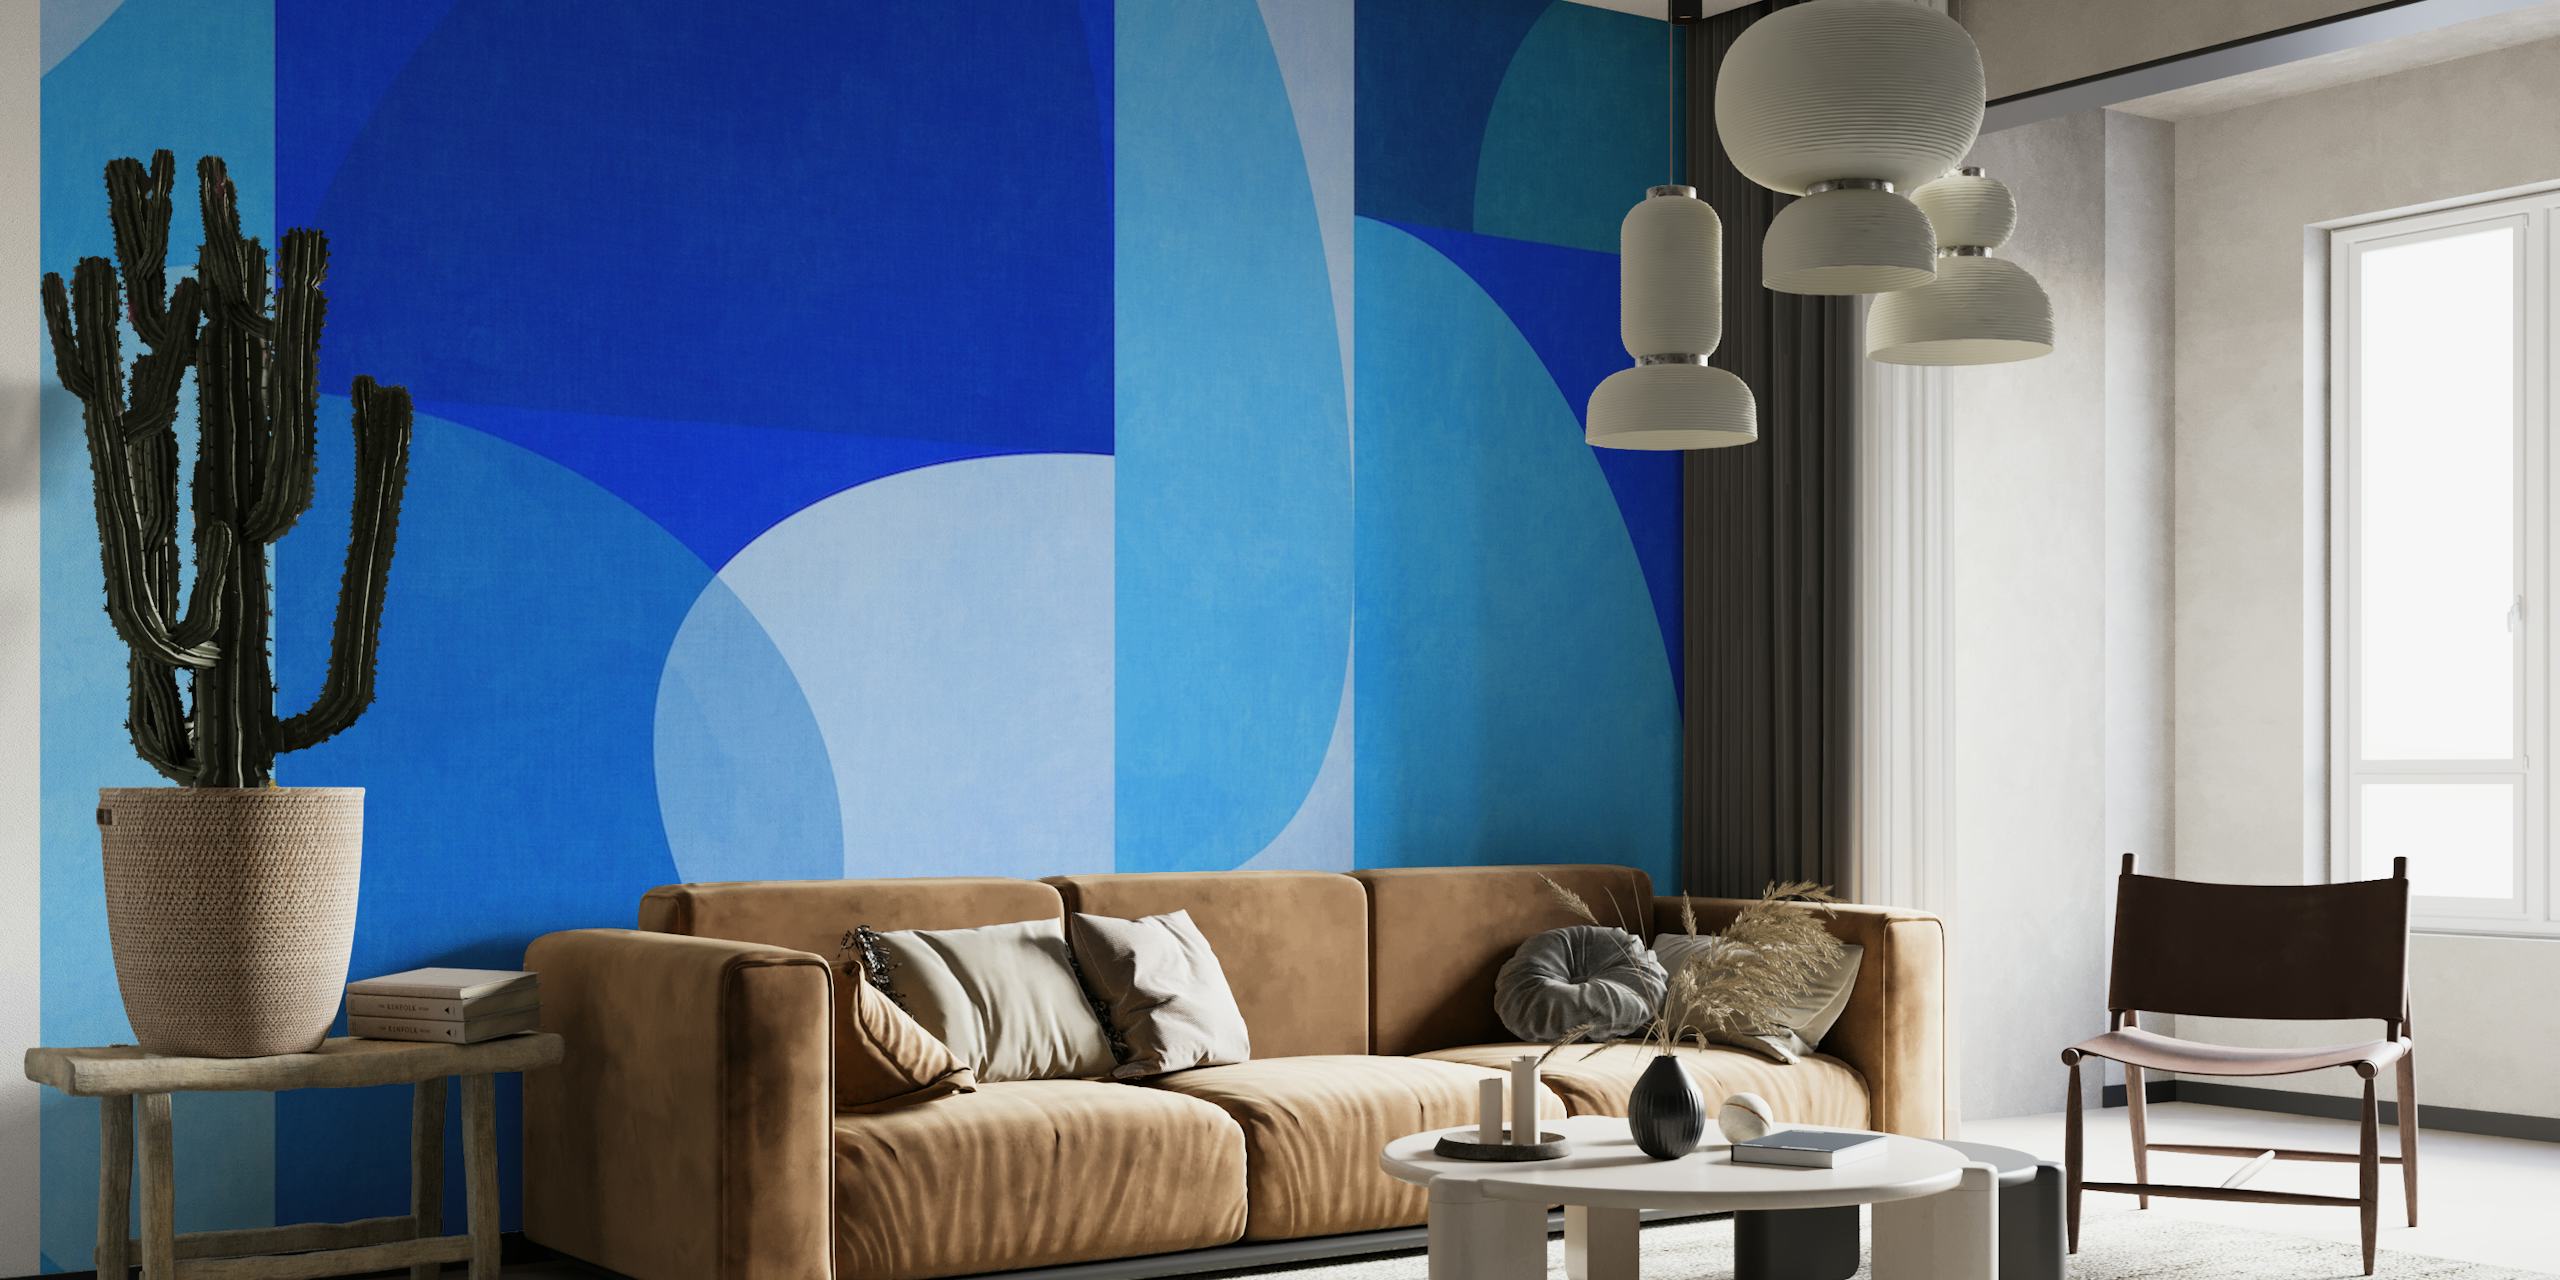 Abstract mid-century modern style wall mural in shades of blue with geometric shapes